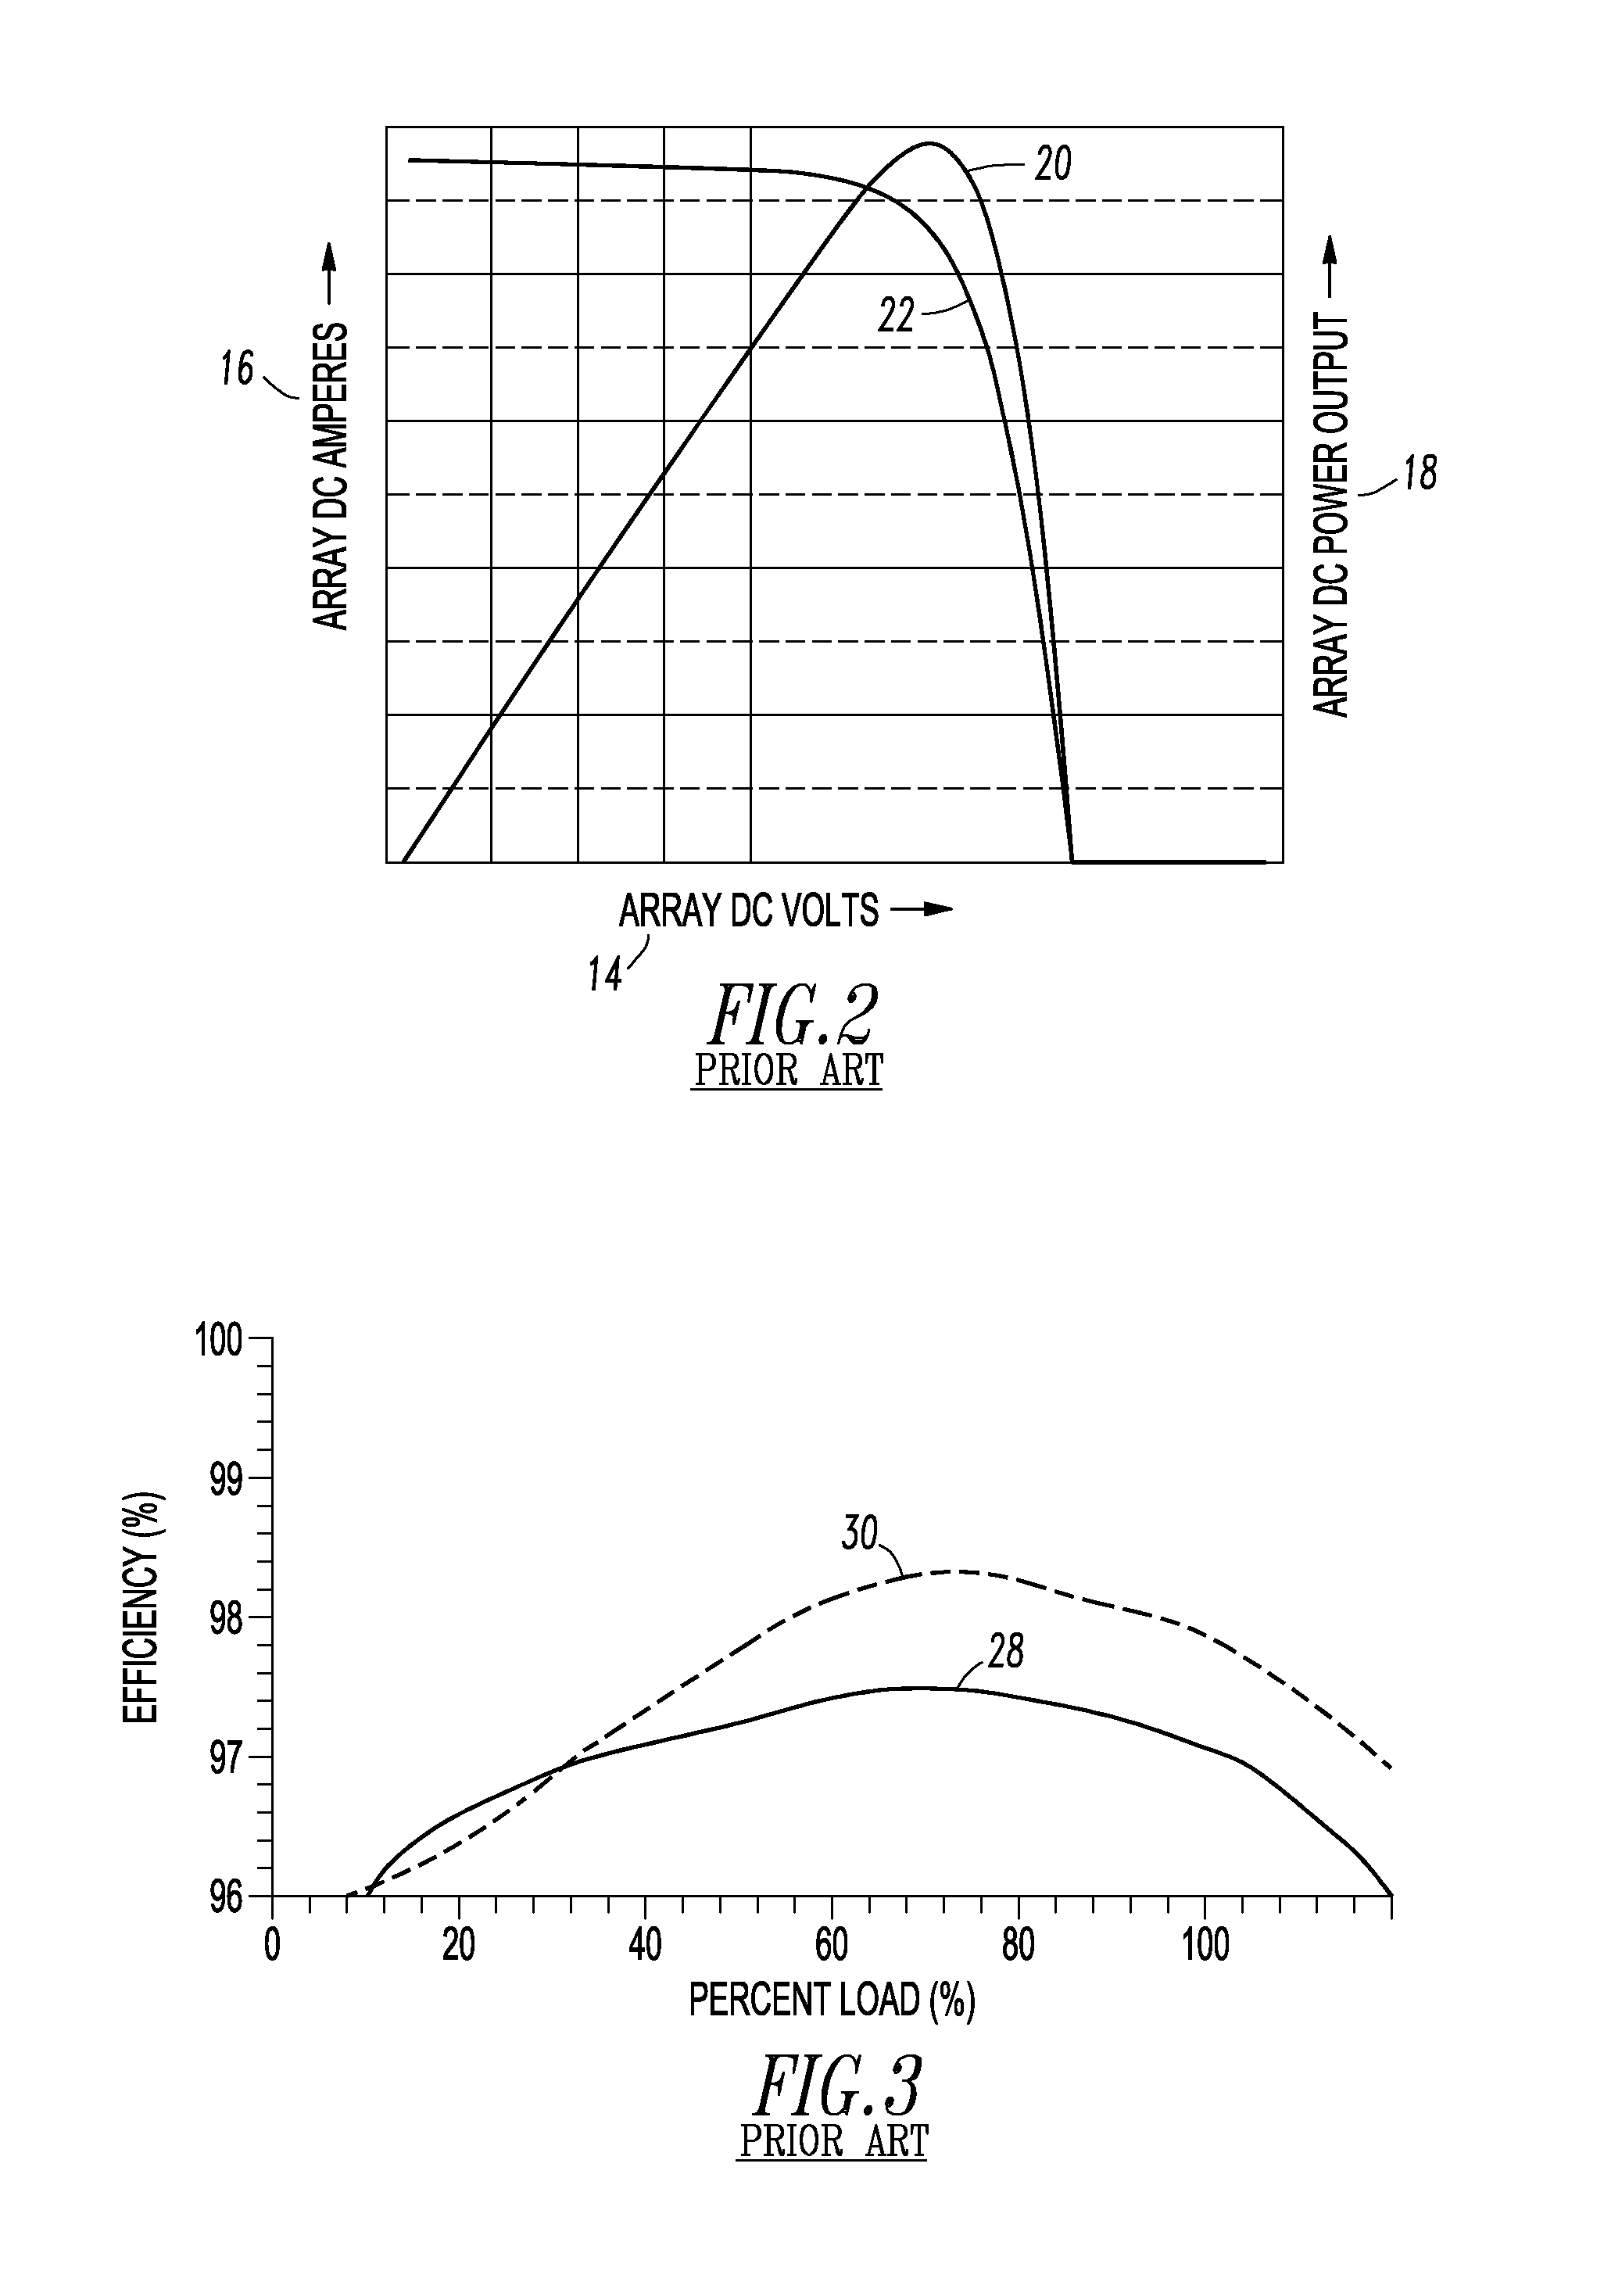 Power conversion system and method providing maximum efficiency of power conversion for a photovoltaic system, and photovoltaic system employing a photovoltaic array and an energy storage device